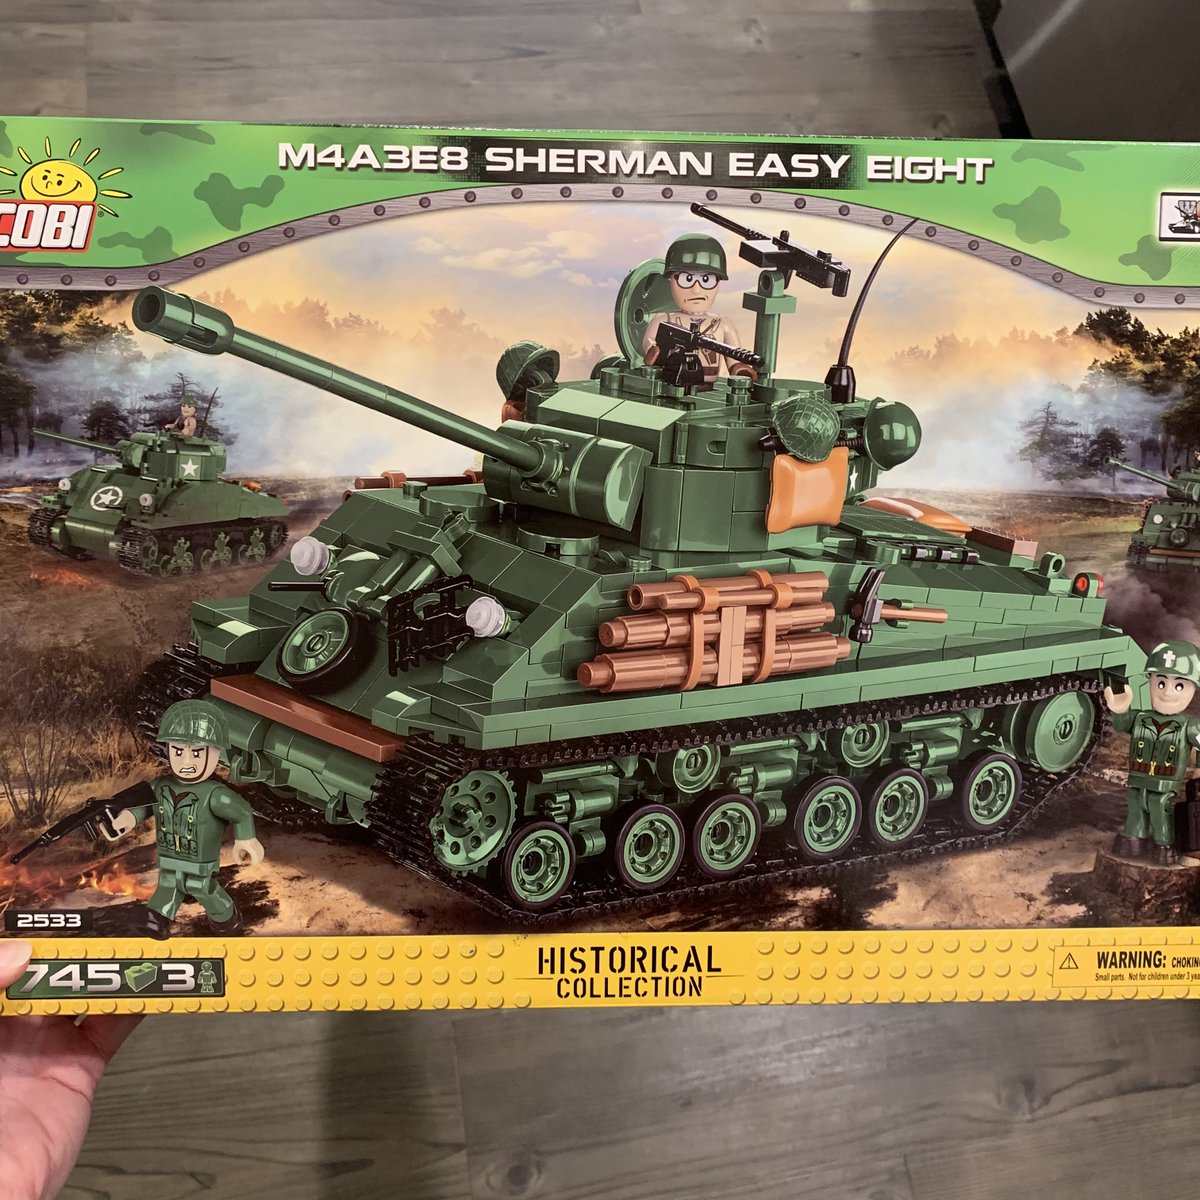 COBI released a new Sherman set, the M4A3E8, which I ordered a couple months ago from  @Warbricks1 – I had been ordering from Amazon but I like to support family businesses and this one is interesting because they incorporate the business into home schooling.